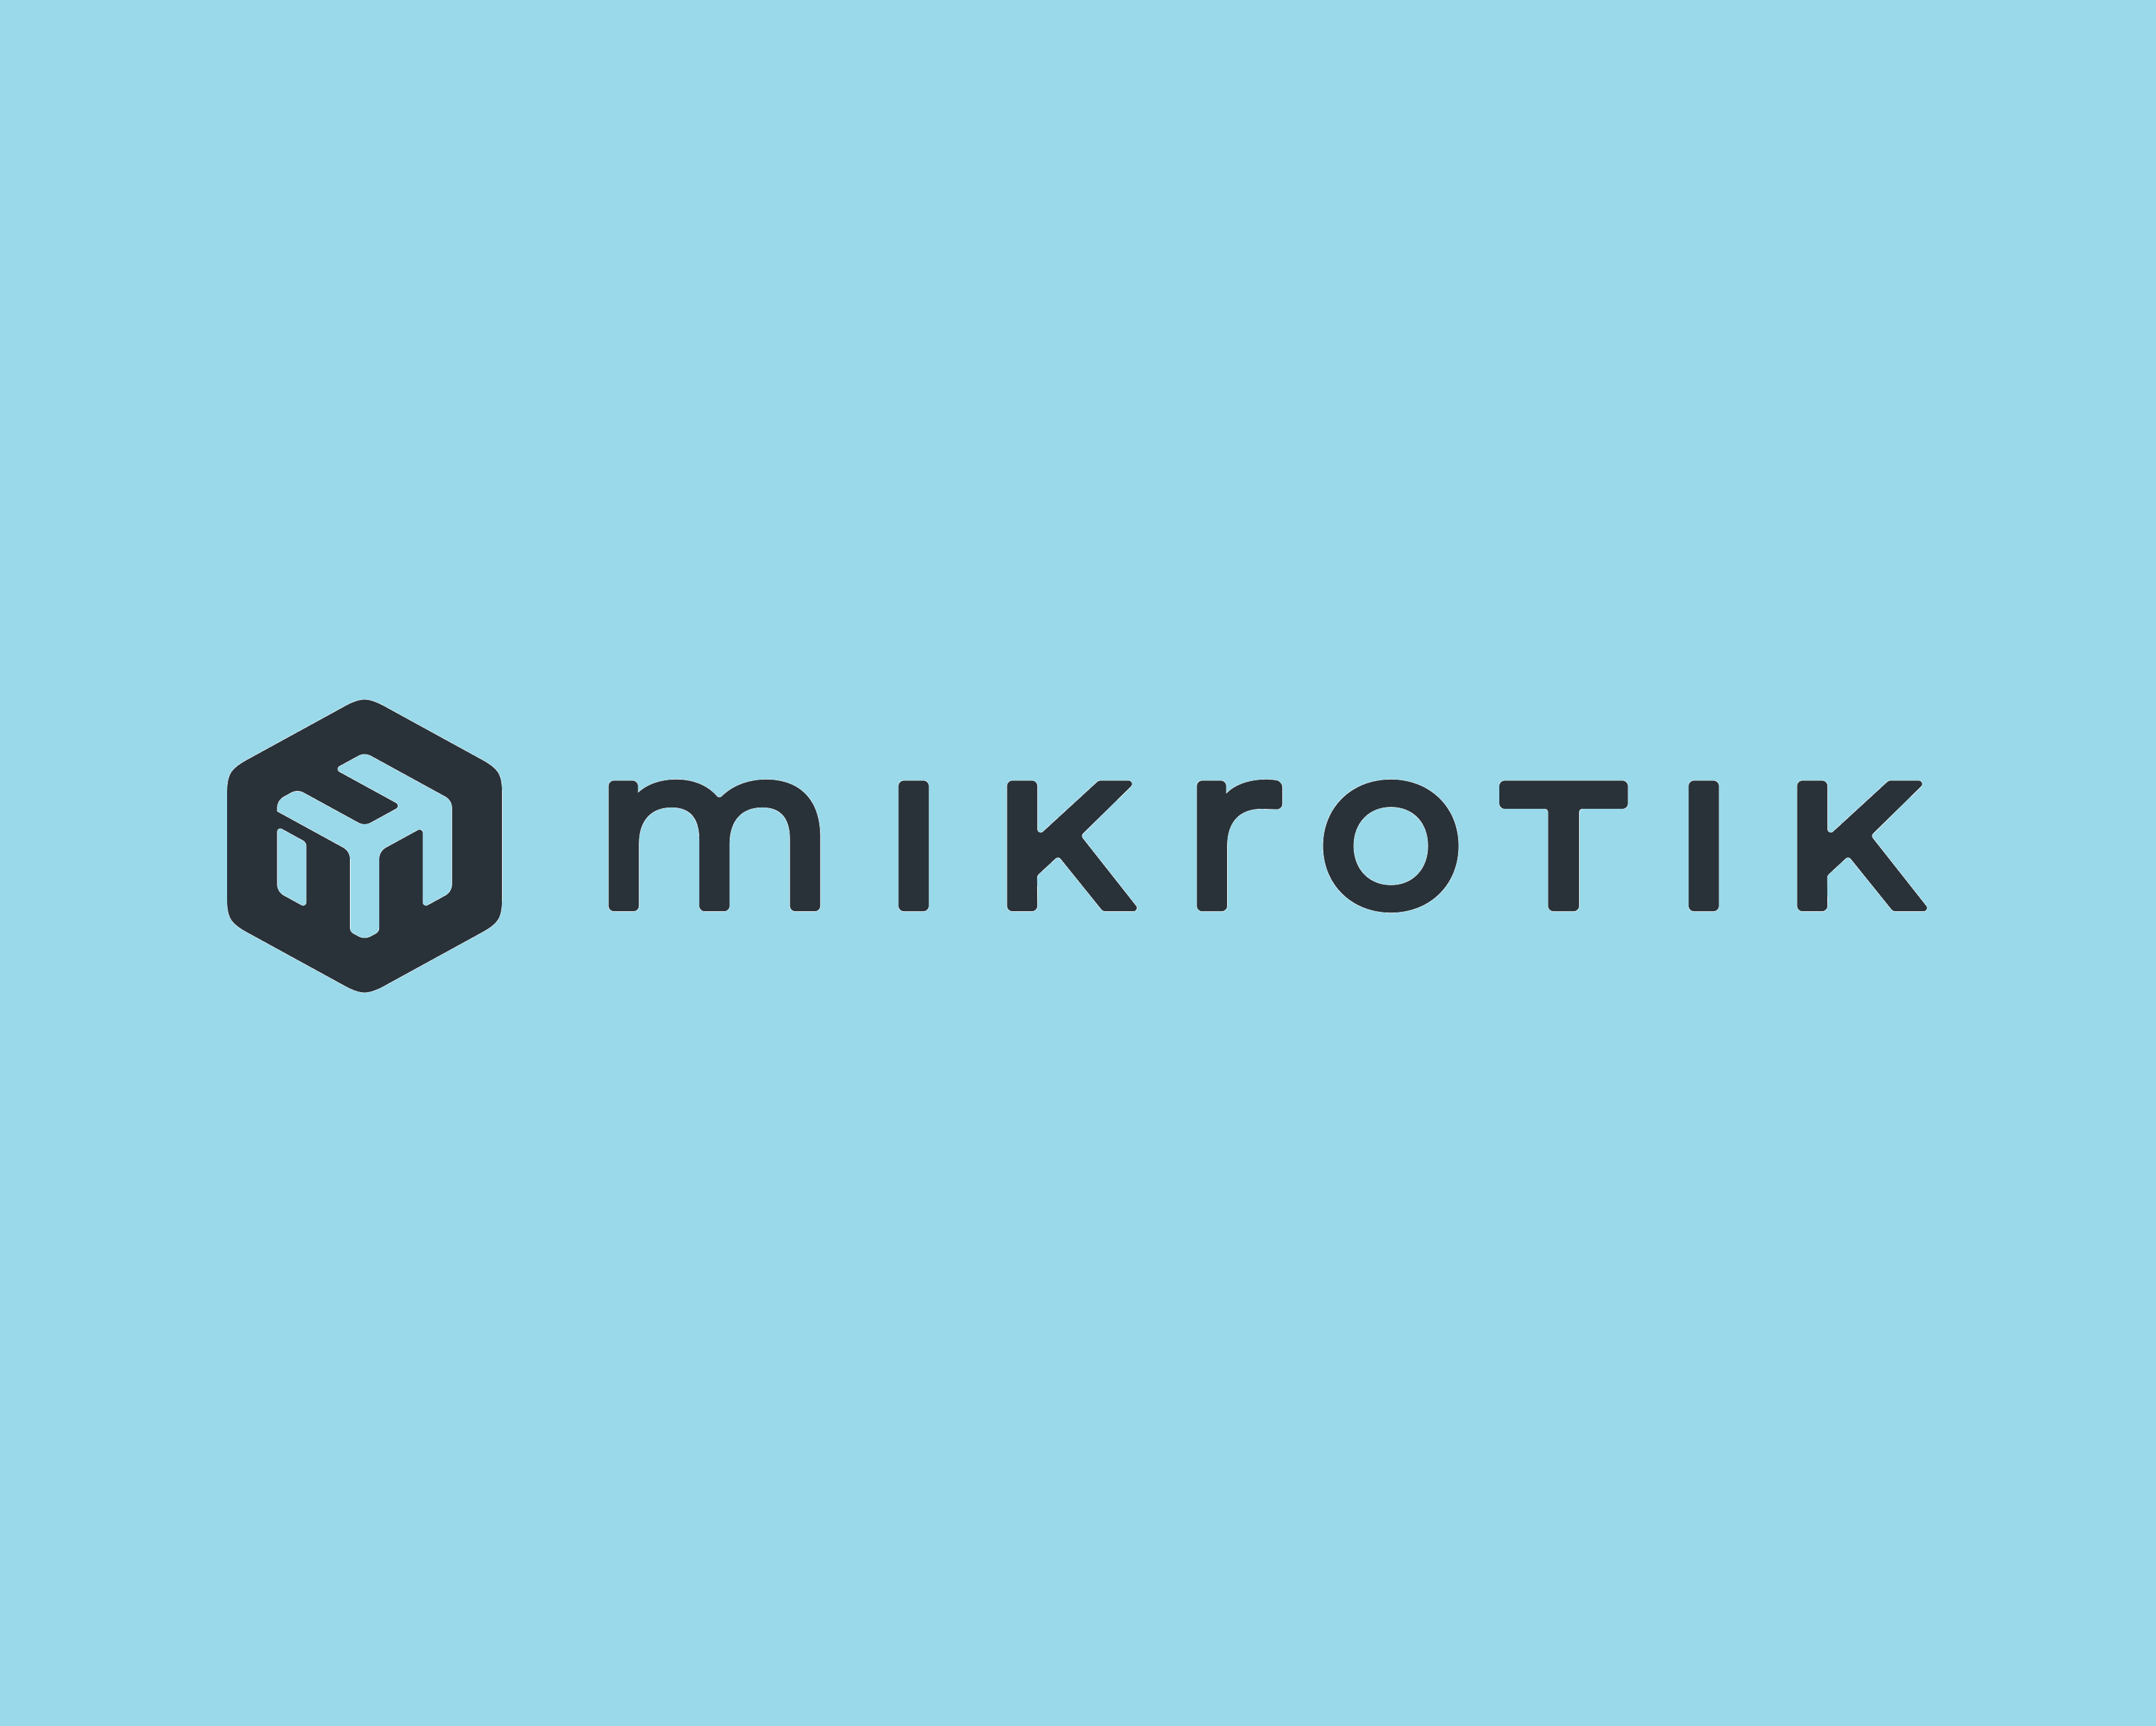 Mikrotik Belatedly Patches RouterOS Flaw Exploited at Pwn2Own